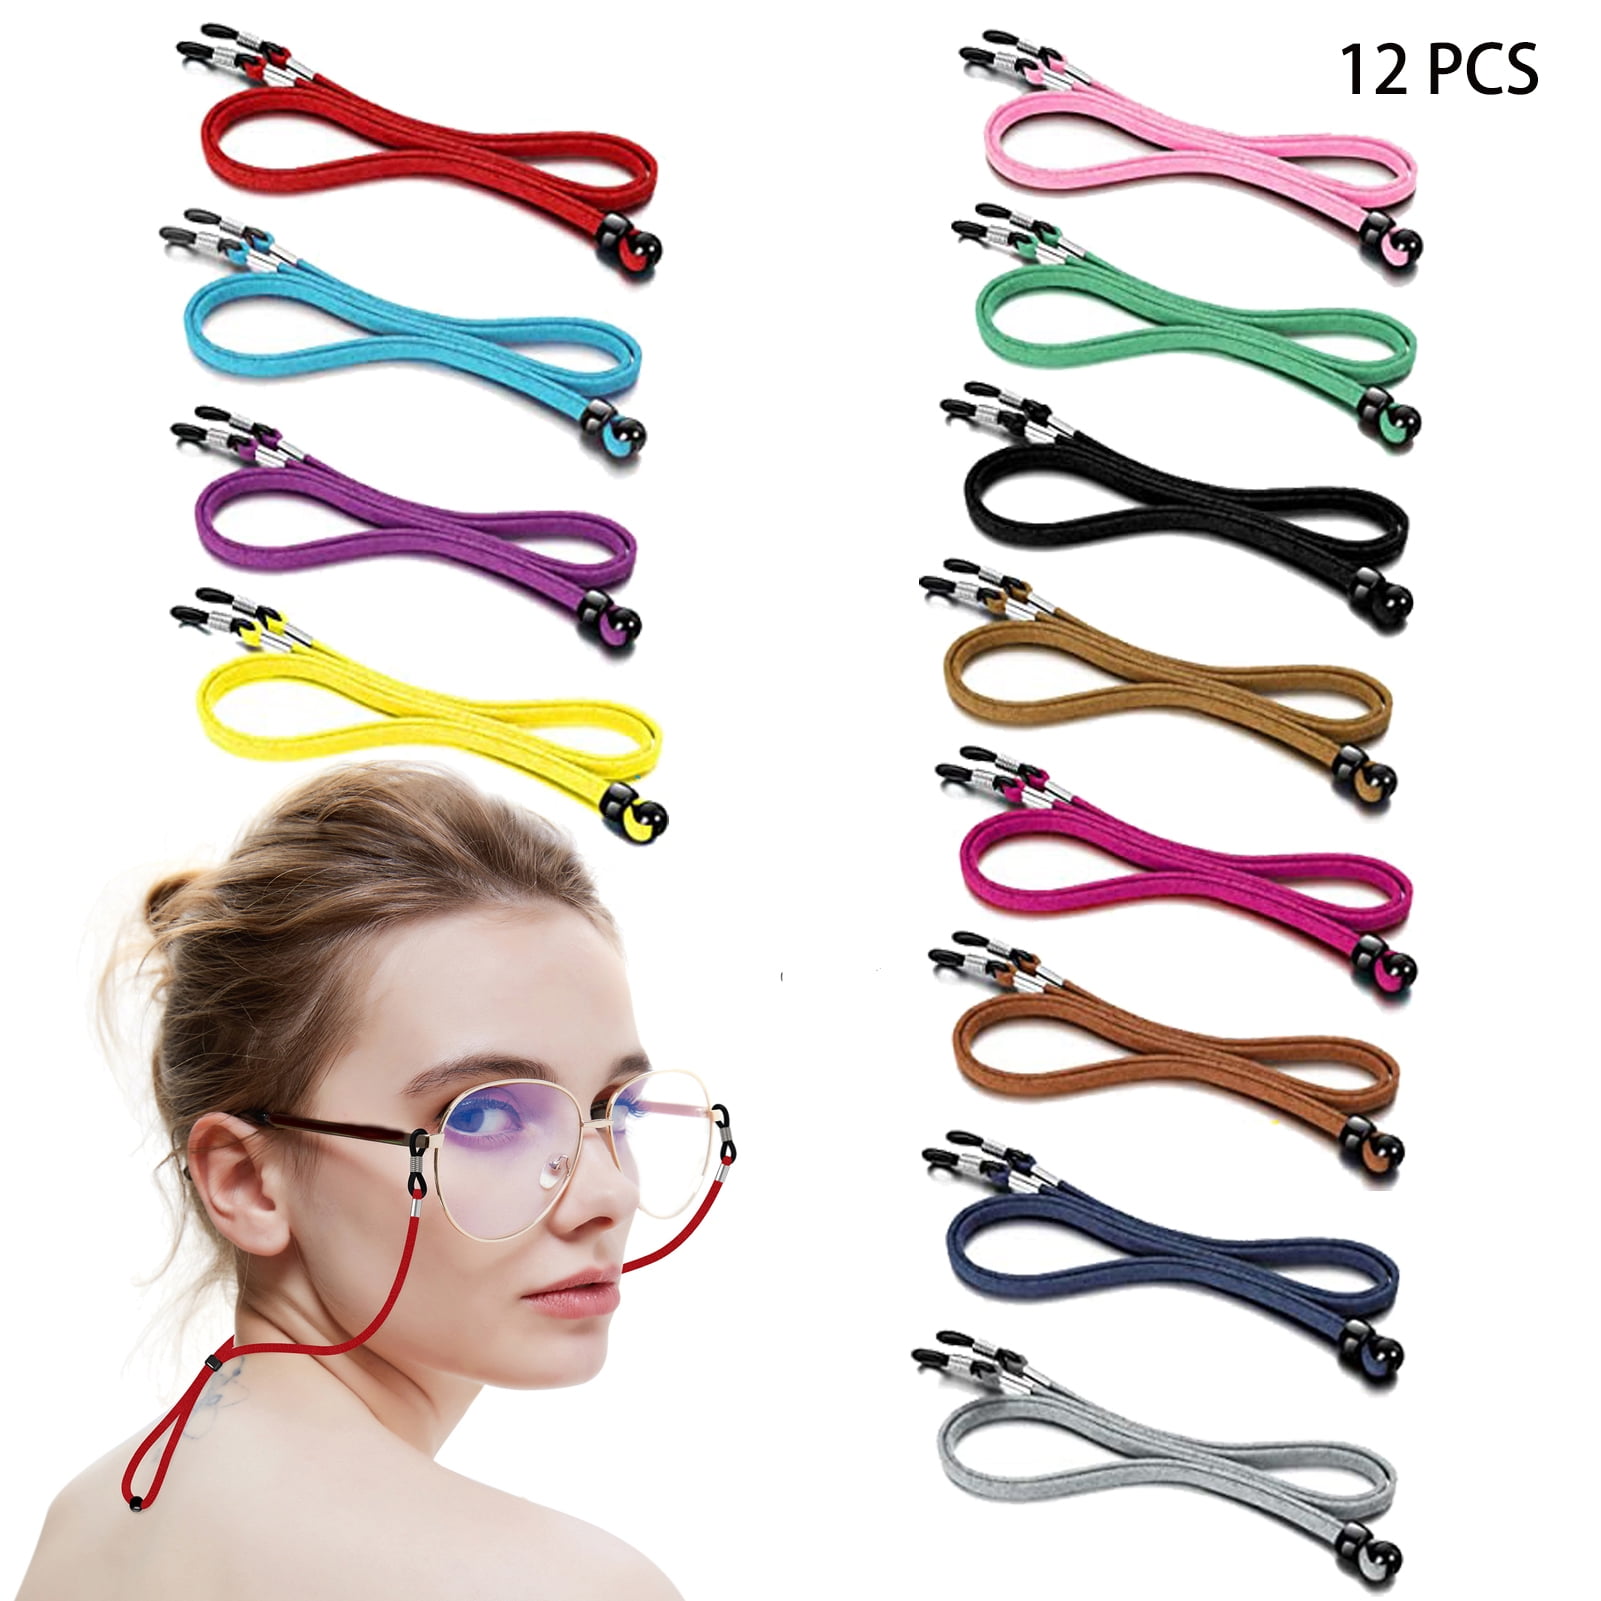 12 Assorted Color Elastic Adjustable Reading Eyewear Glasses Neck Retainers Safety Strap Cord Rope Holder for Kid Children Eyeglass Chain 